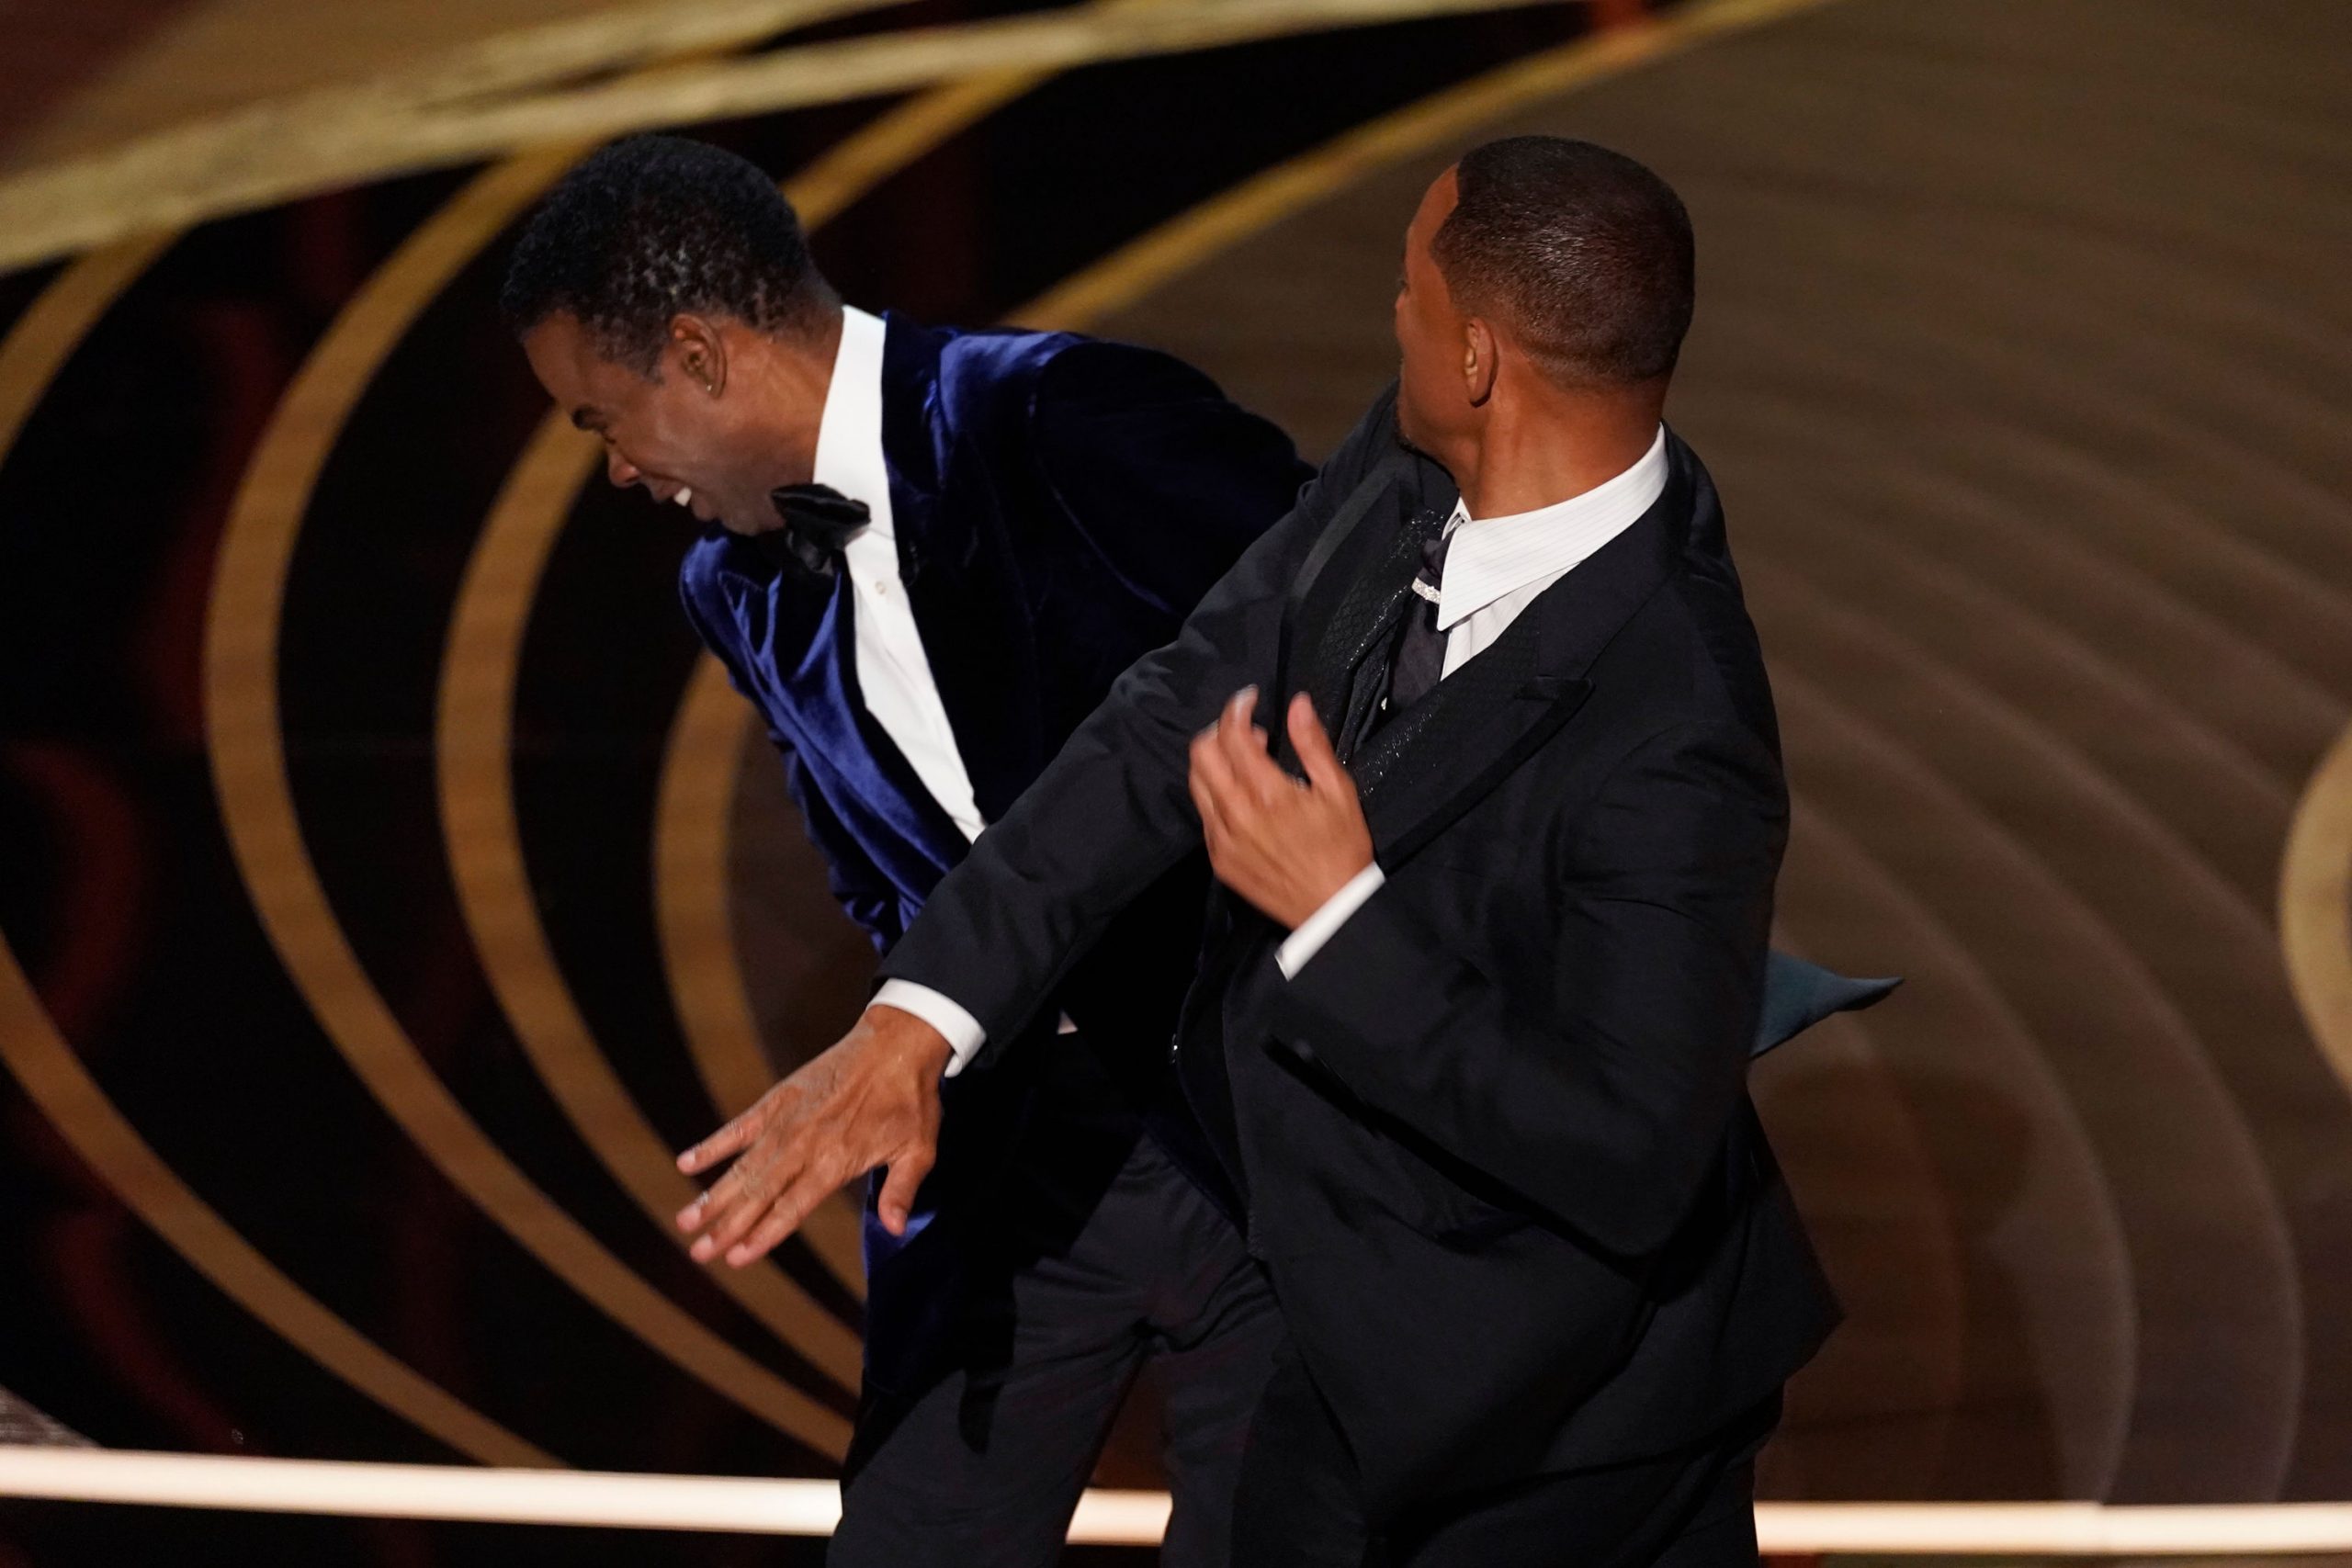 ‘I am heartbroken’: Will Smith resigns from Academy for slapping Chris Rock